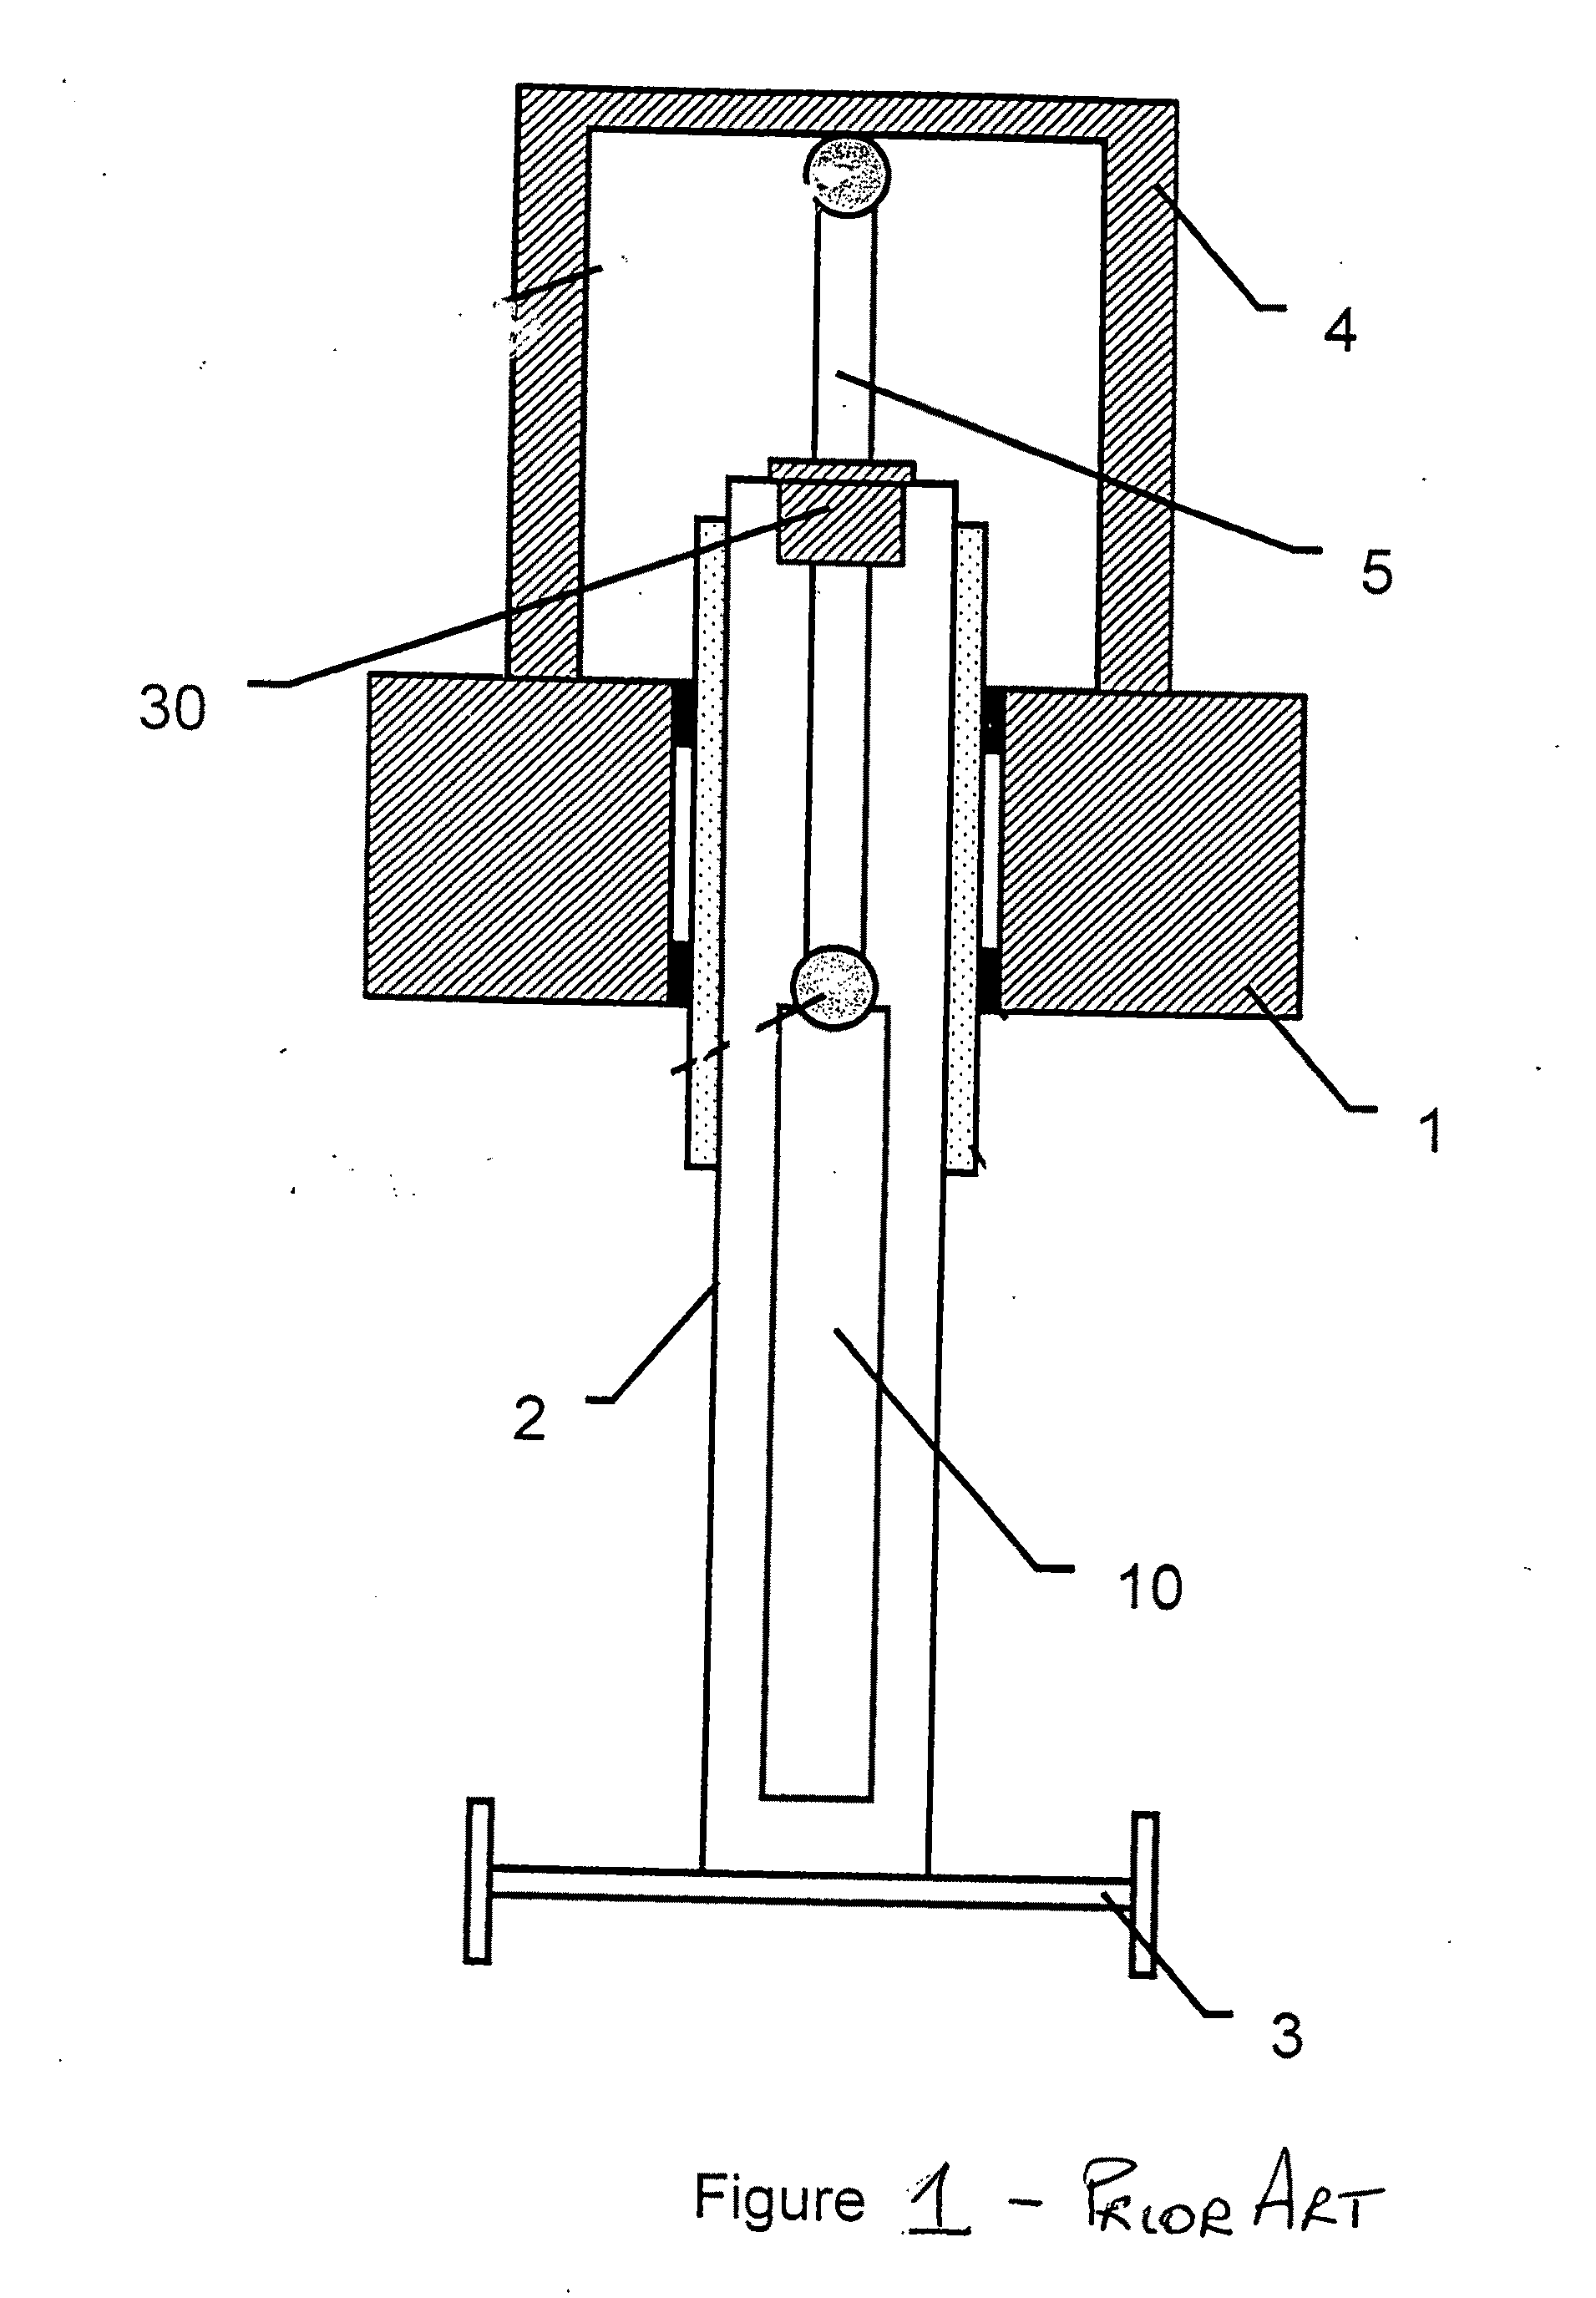 WEC with improved power take off apparatus